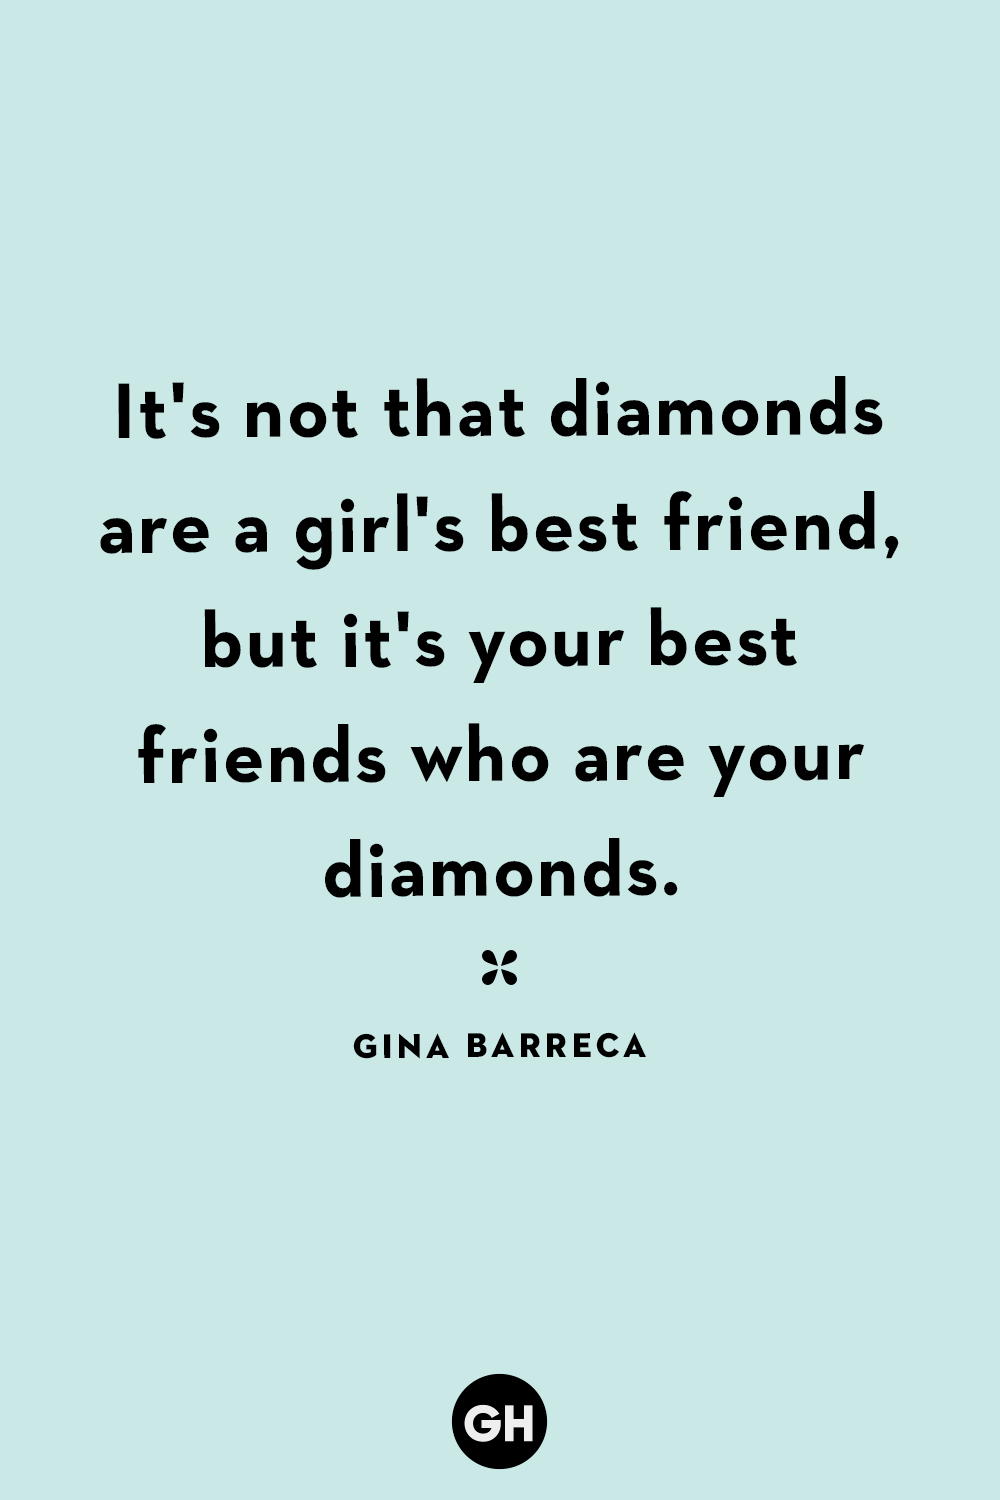 Friend quotes to your best Top 112